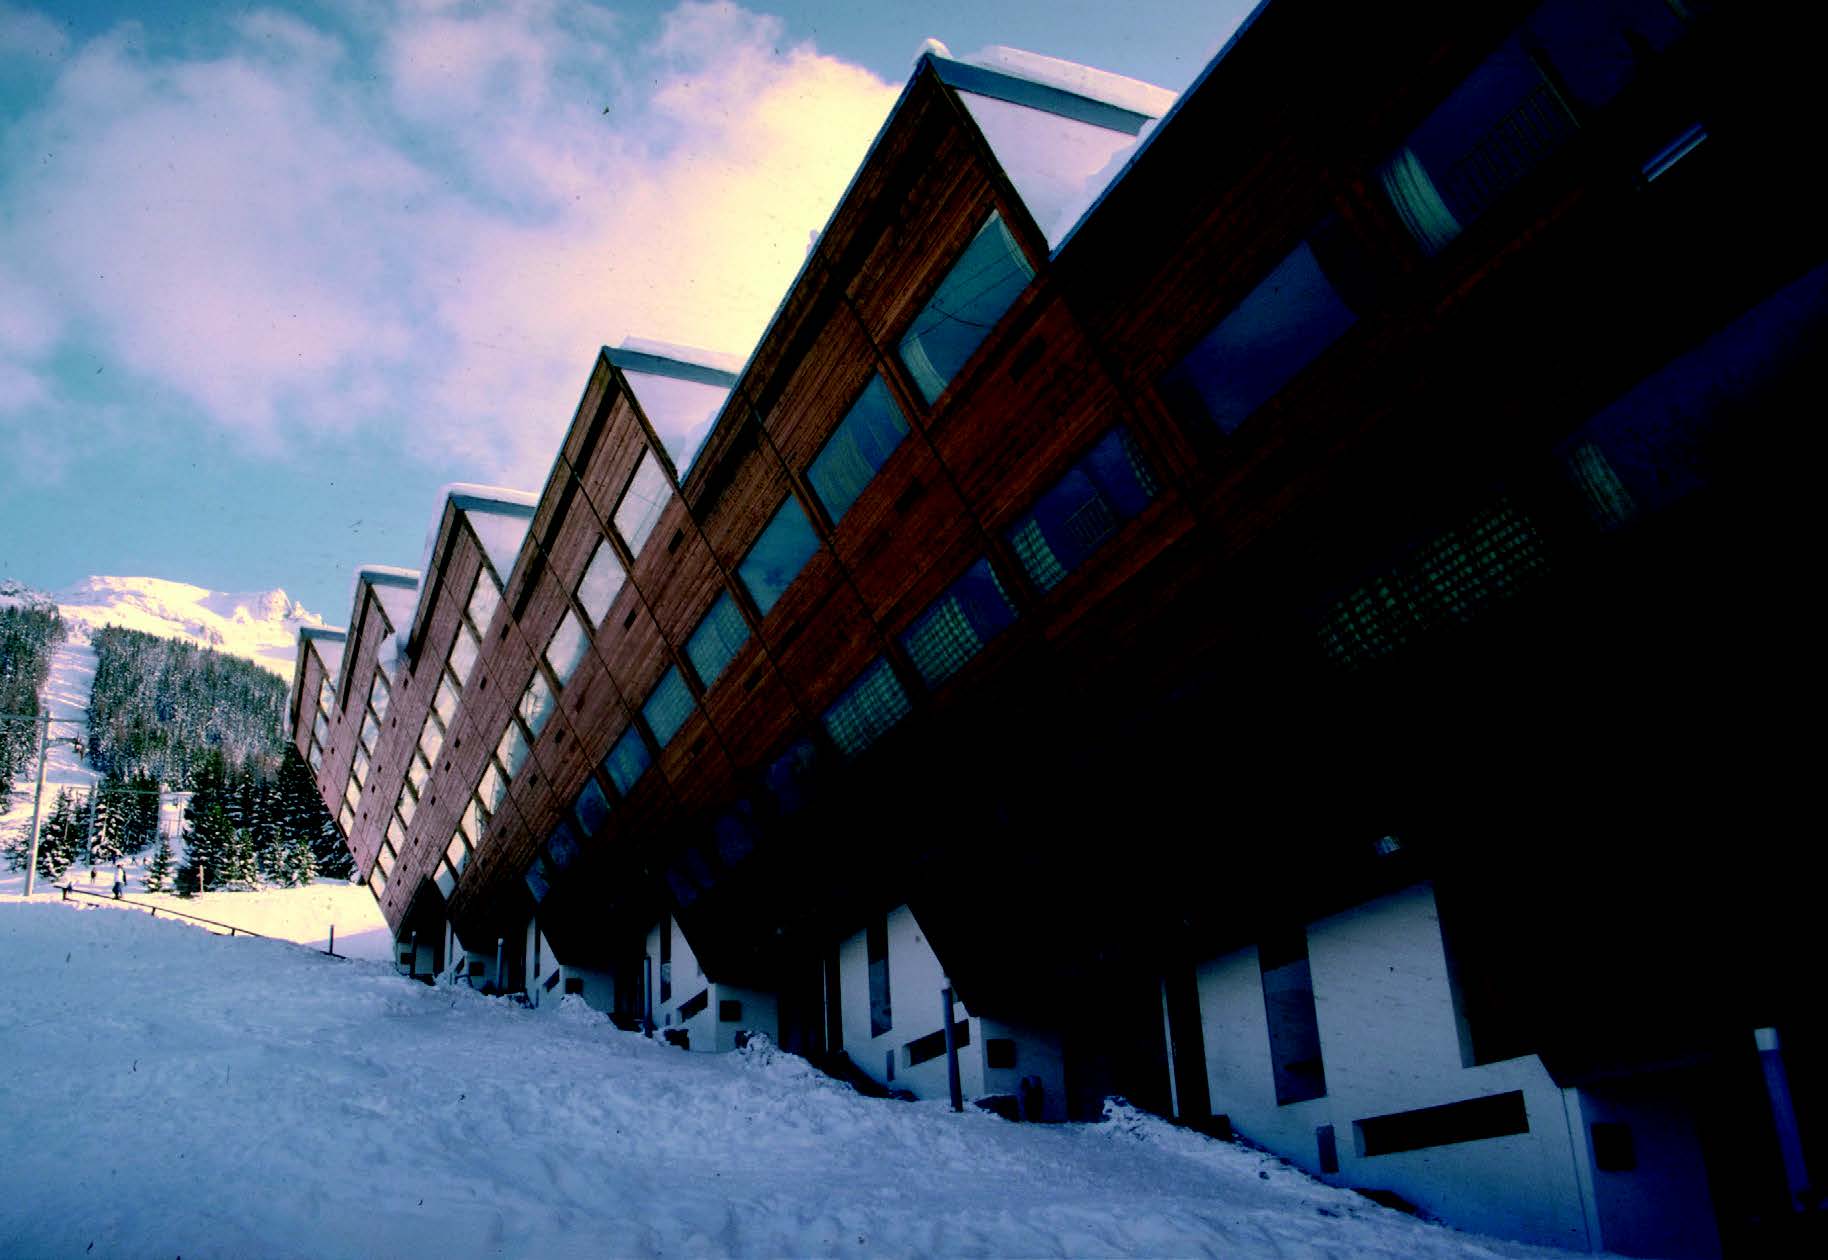 Les Arcs, the French ski resort designed by a group of architects in 1967-1969 led by Charlotte Perriand